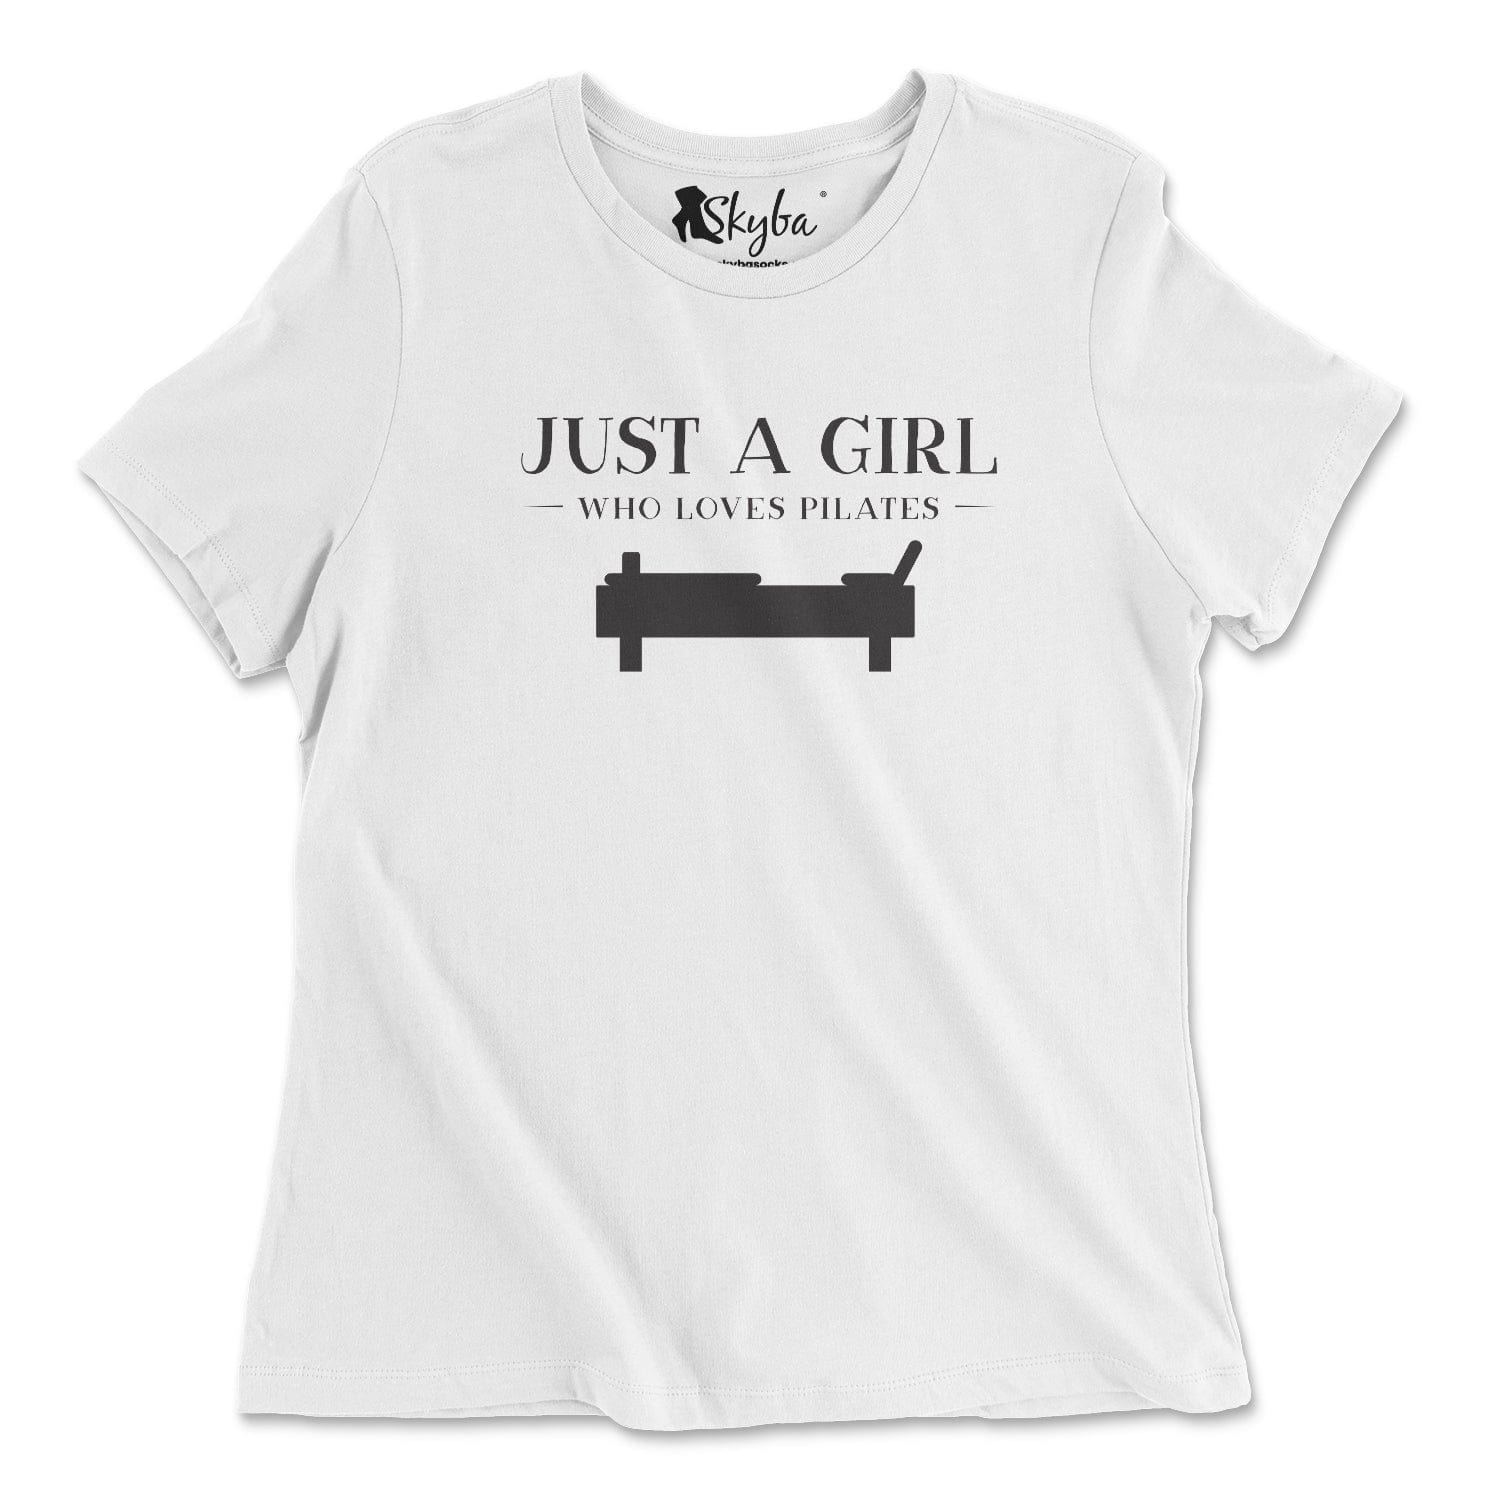 Just a Girl Who Loves Pilates - Classic Tee Skyba T-Shirt